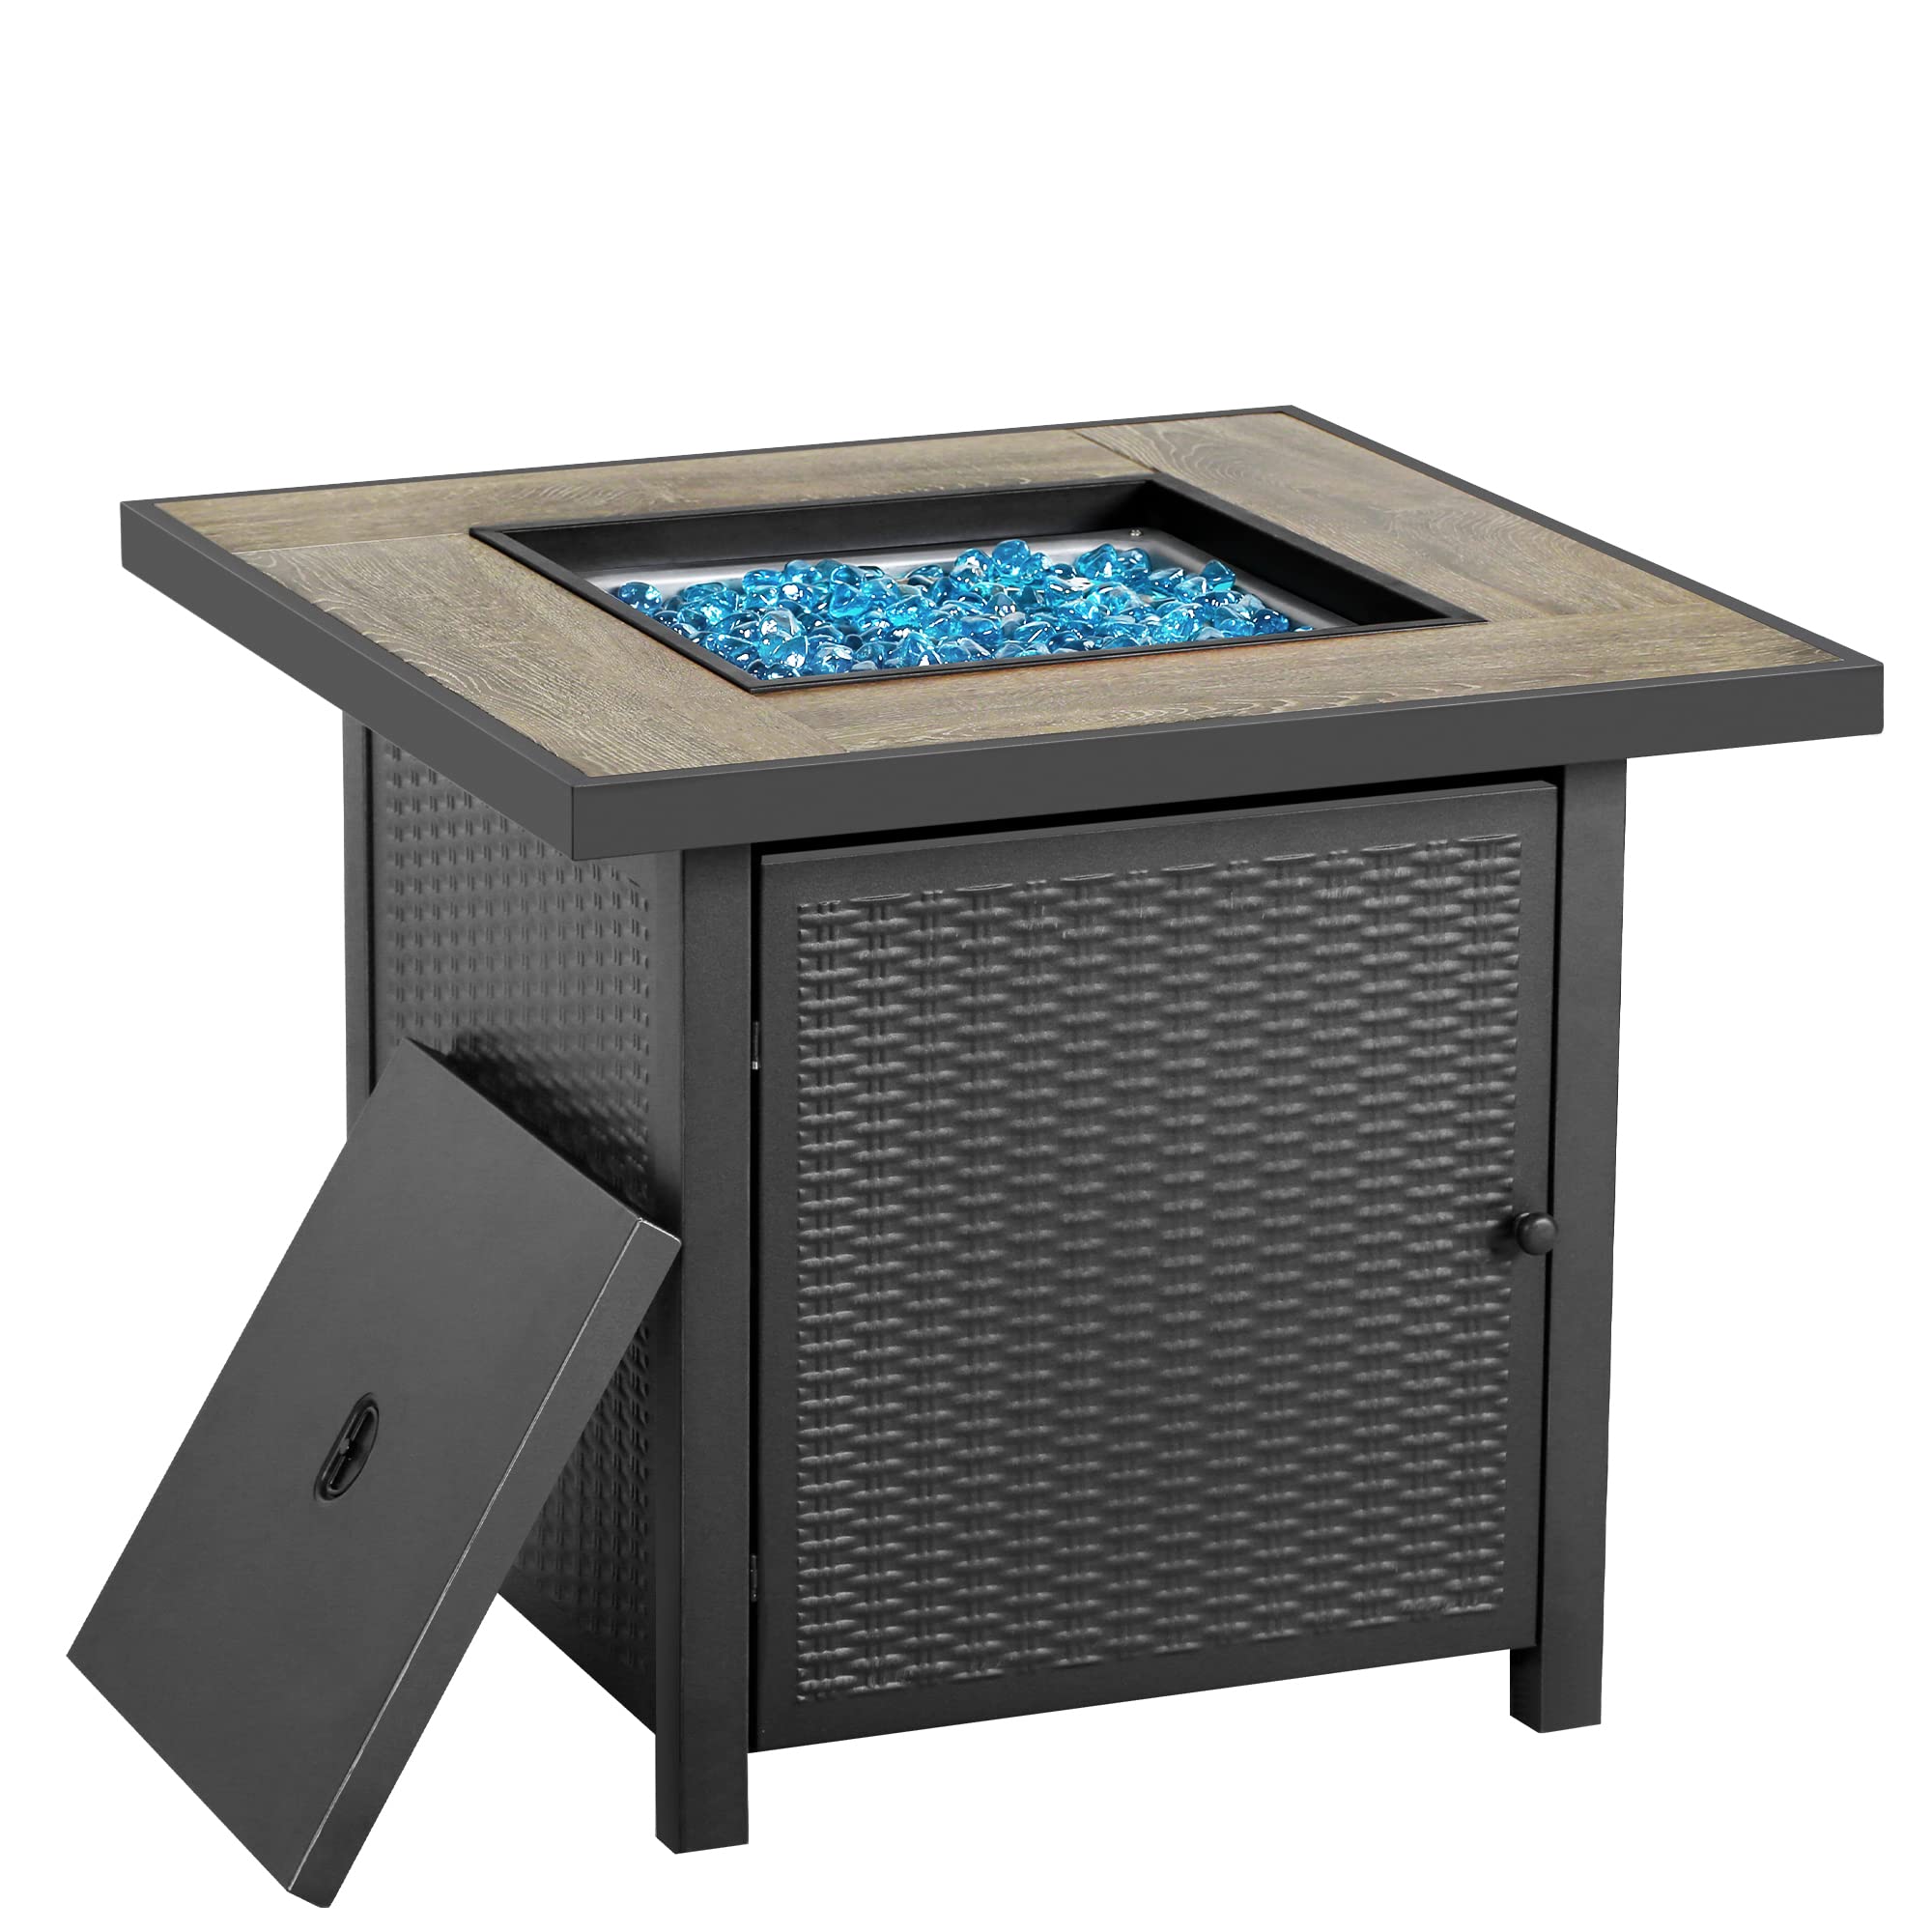 BALI OUTDOORS 30 Inch Propane Fire Pit Table, Gas Fire Pit for Outside Patio Square, 50,000 BTU